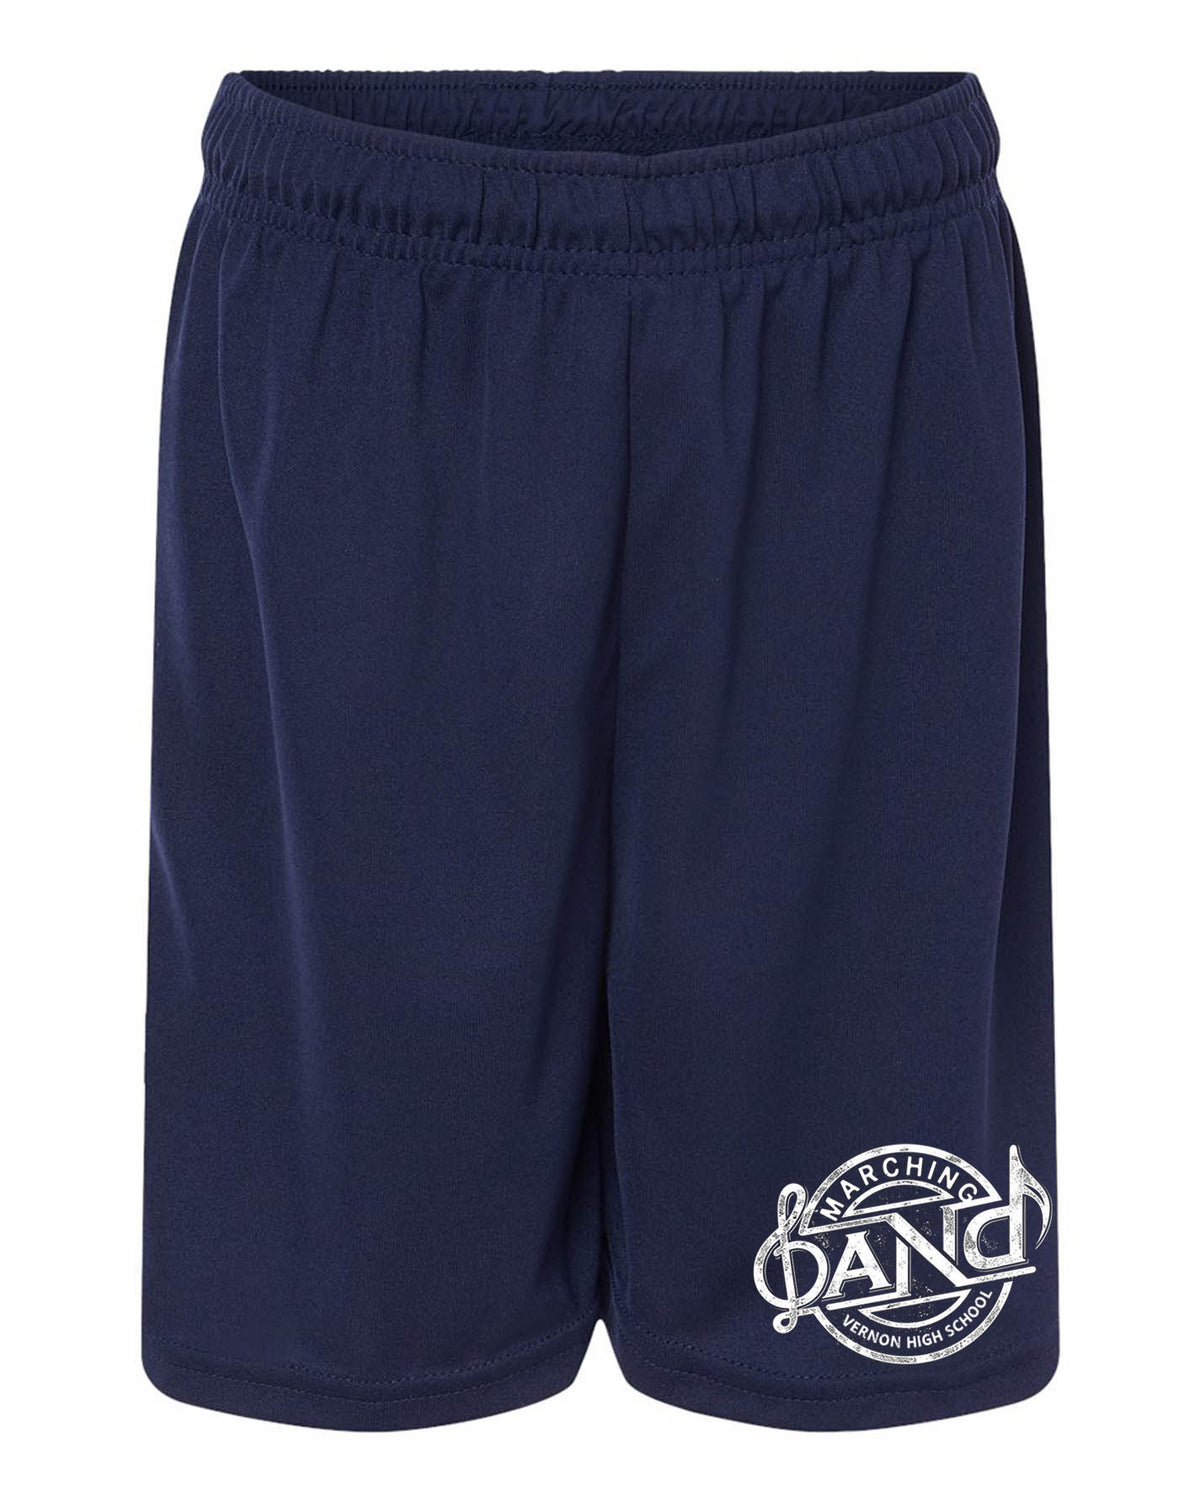 Vernon Marching Band Performance Shorts Design 1